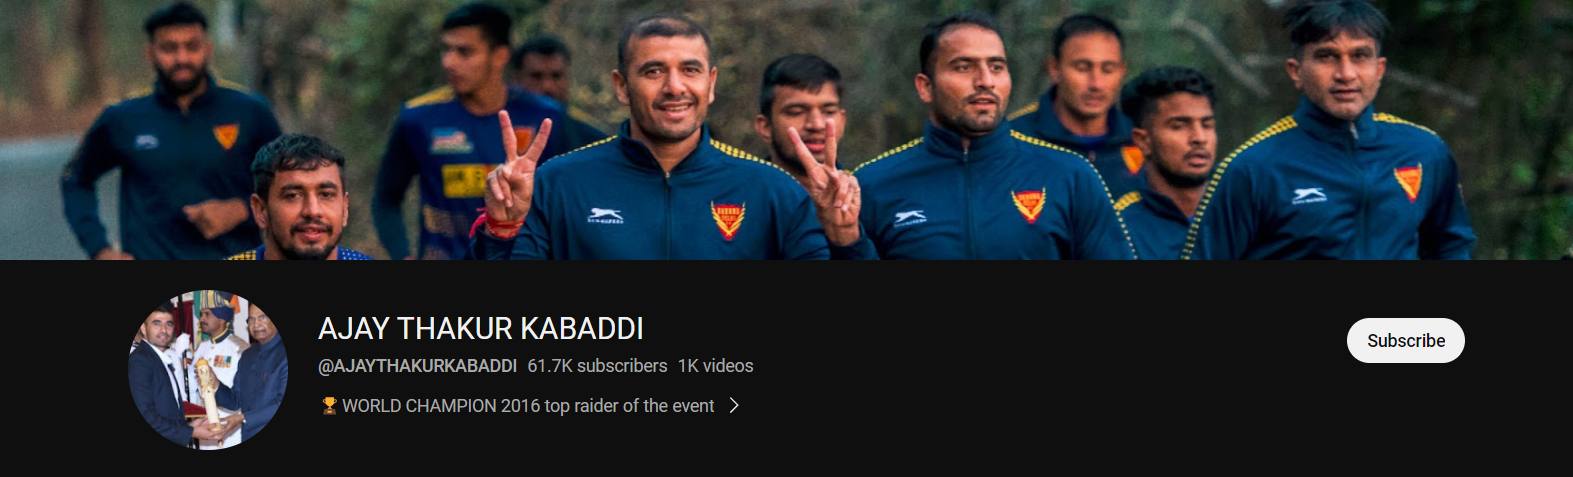 Ajay Thakur's YouTube channel